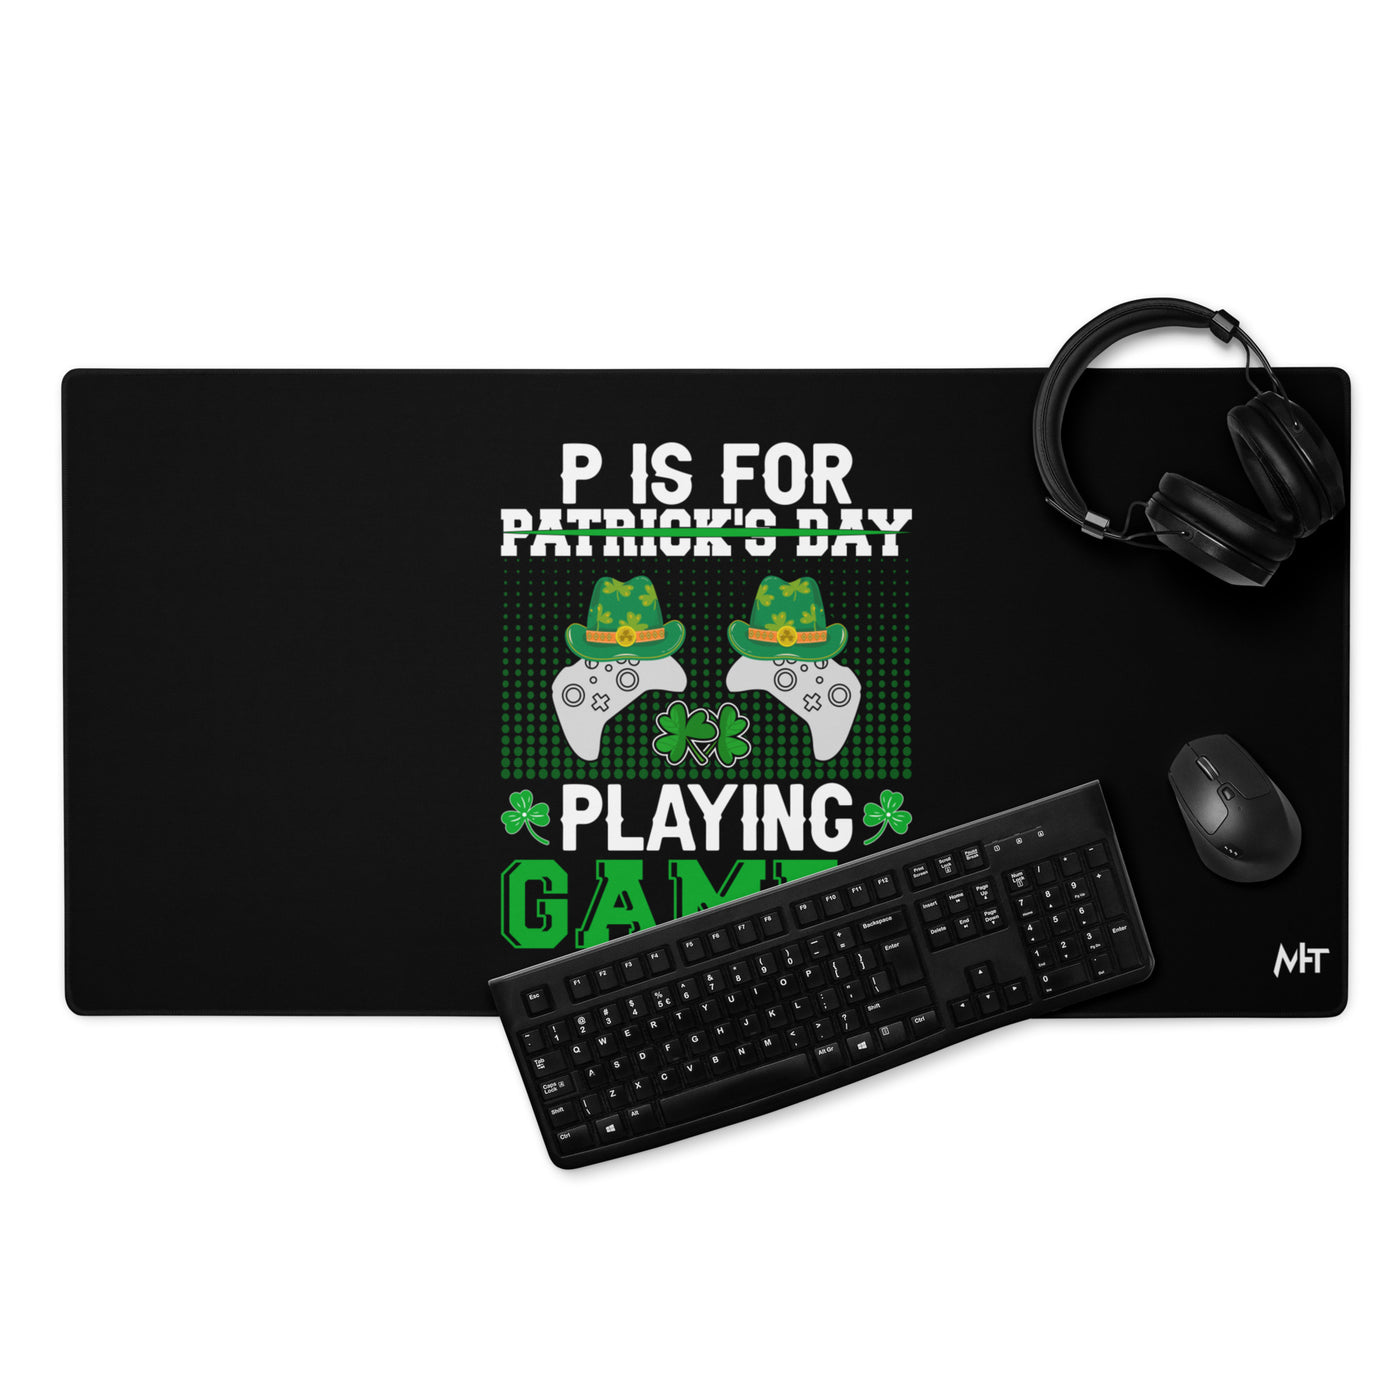 P is for "Playing Games" - Desk Mat